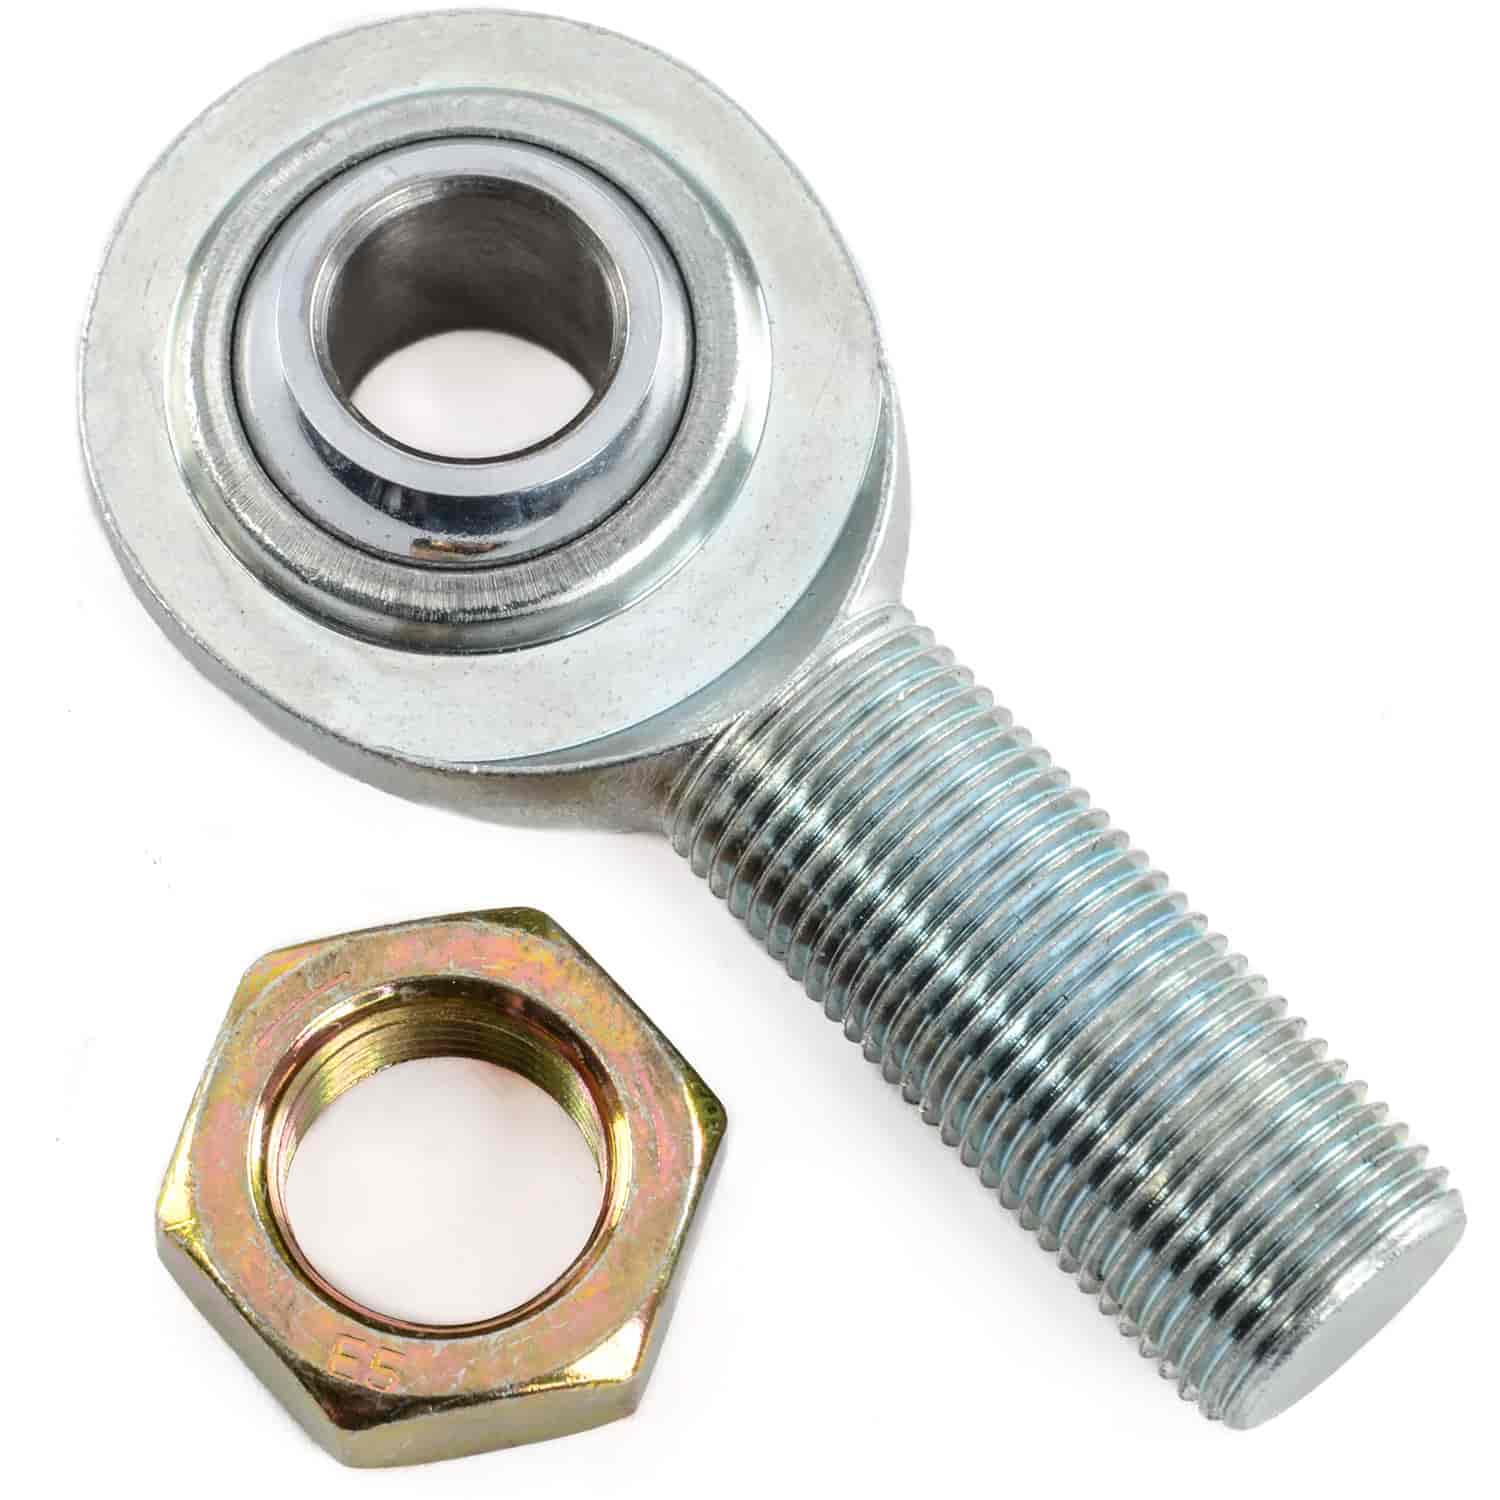 Two-Piece Rod End with Jam Nut 5/8